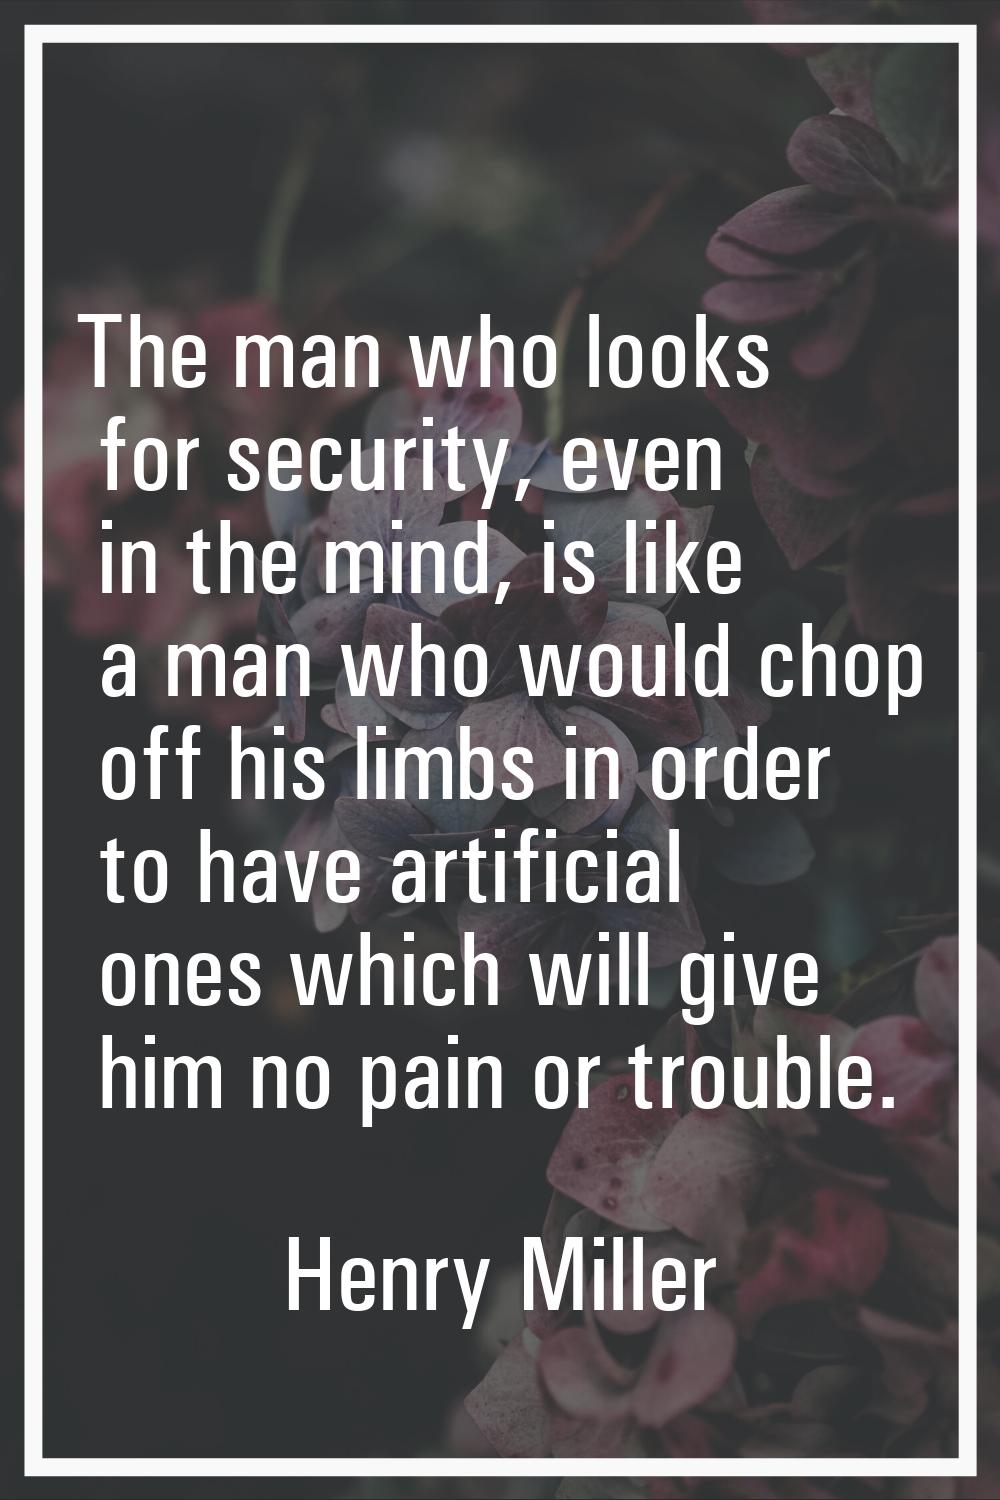 The man who looks for security, even in the mind, is like a man who would chop off his limbs in ord